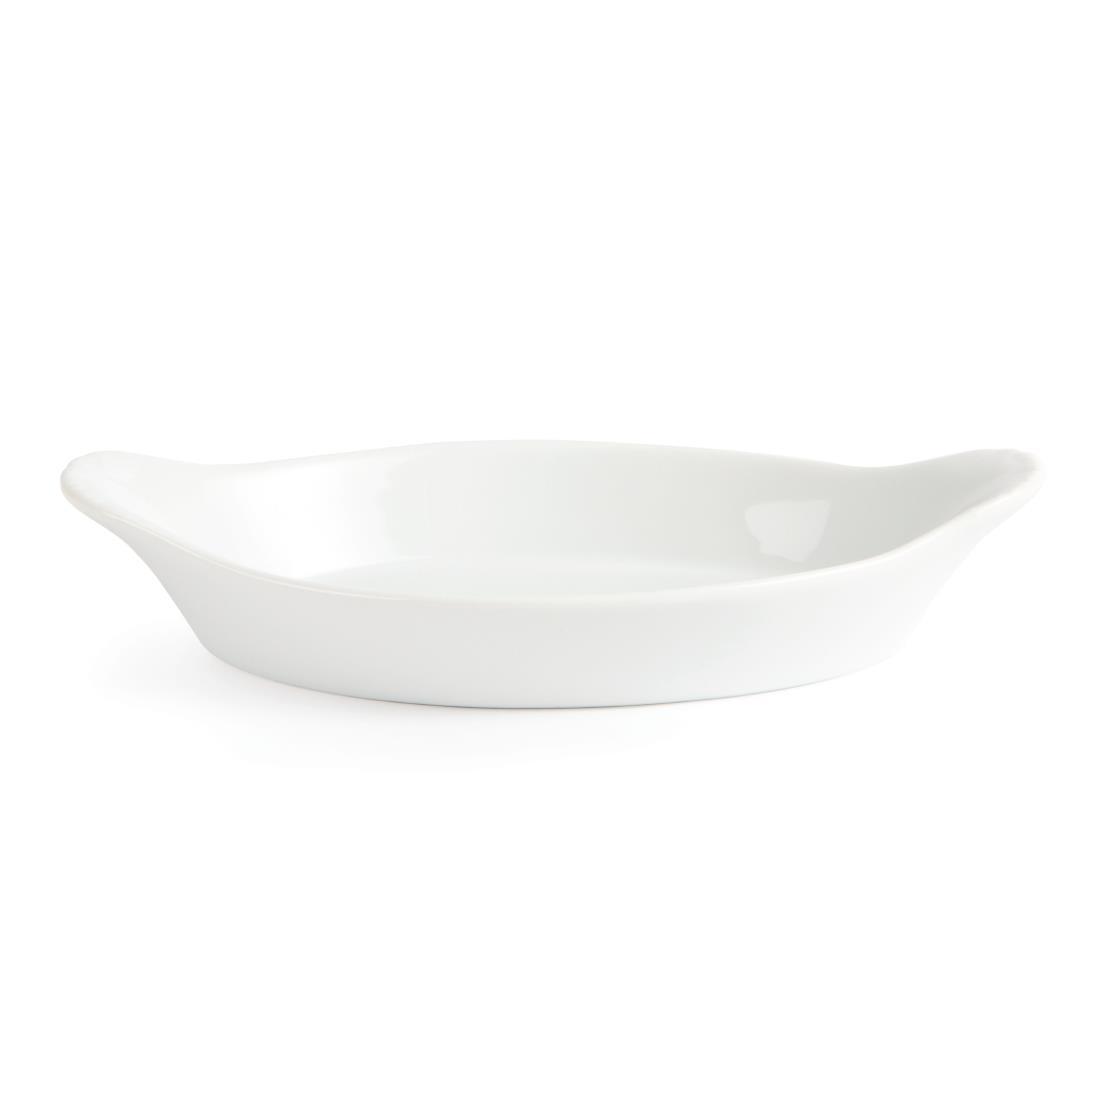 Olympia Whiteware Oval Eared Dishes 204mm (Pack of 6) - W441  - 3